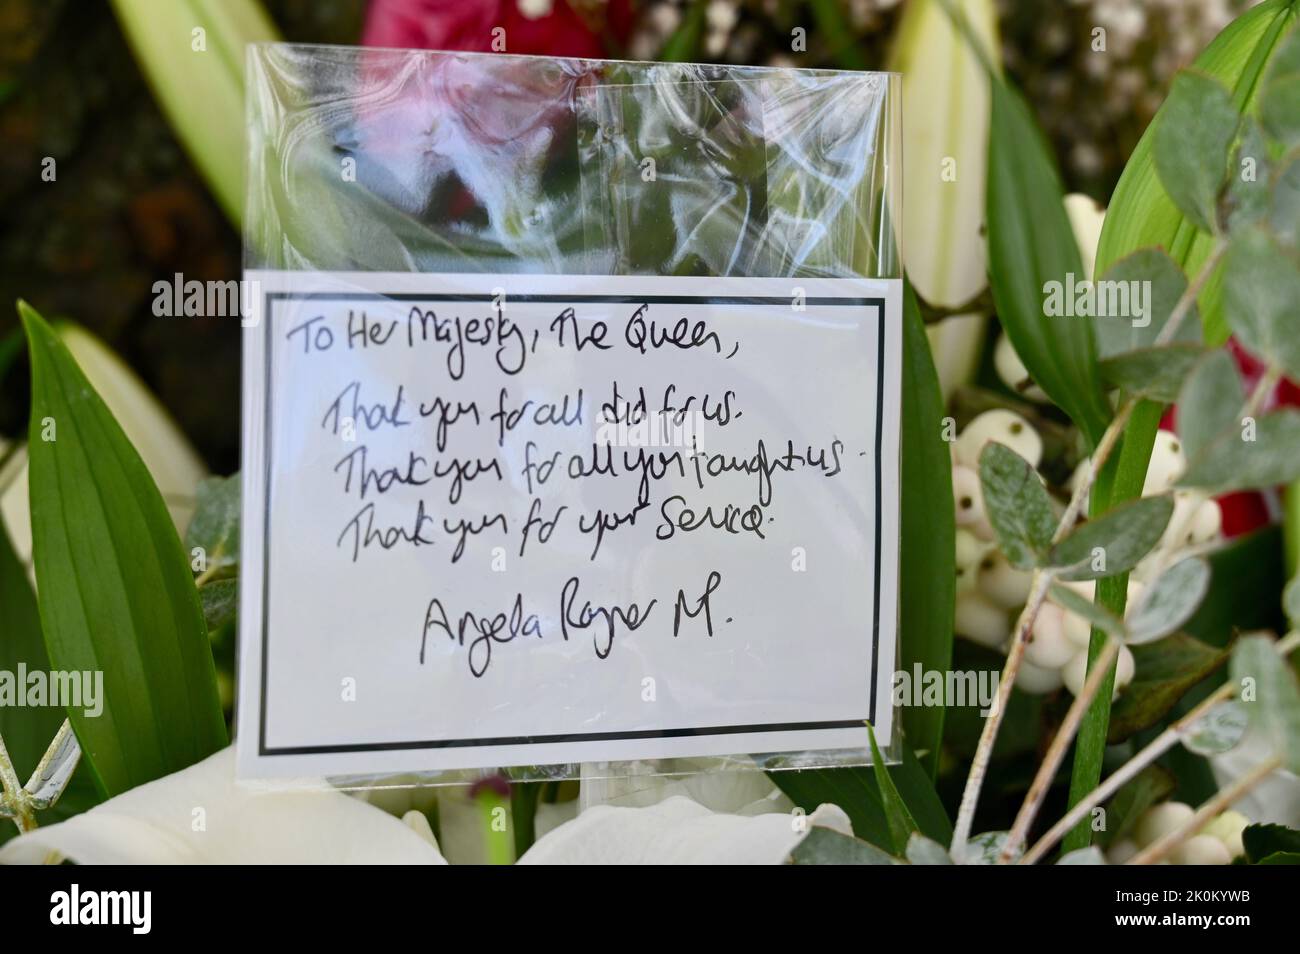 12th September. London, UK. Deputy Labour Leader Angela Rayner left a touching floral tribute to Queen Elizabeth II in St James Park following her death on 08.09.2022. She wrote 'Thank you for all you did for us, Thank you for all you taught us, Thank you for your service' Credit: michael melia/Alamy Live News Stock Photo